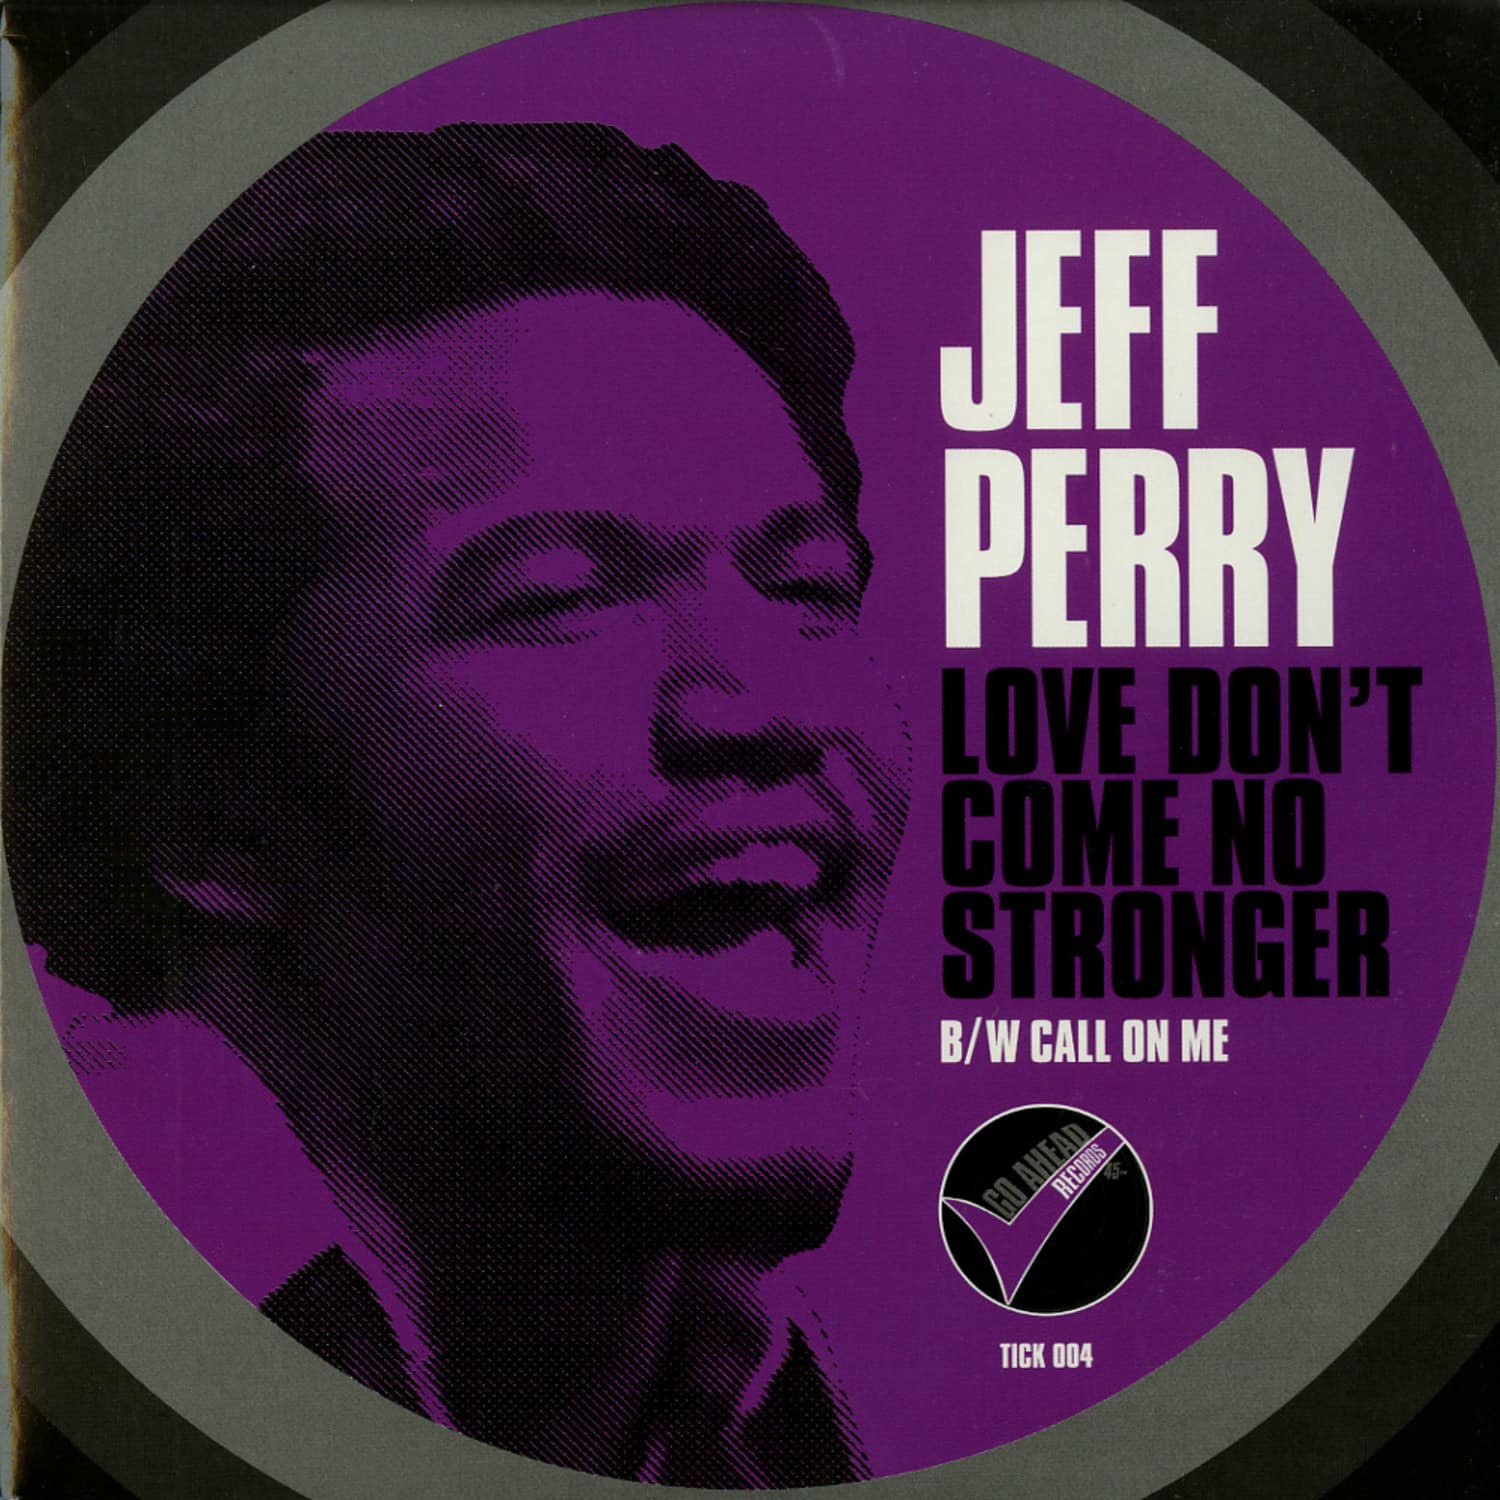 Jeff Perry - LOVE DONT COME NO STRONGER 